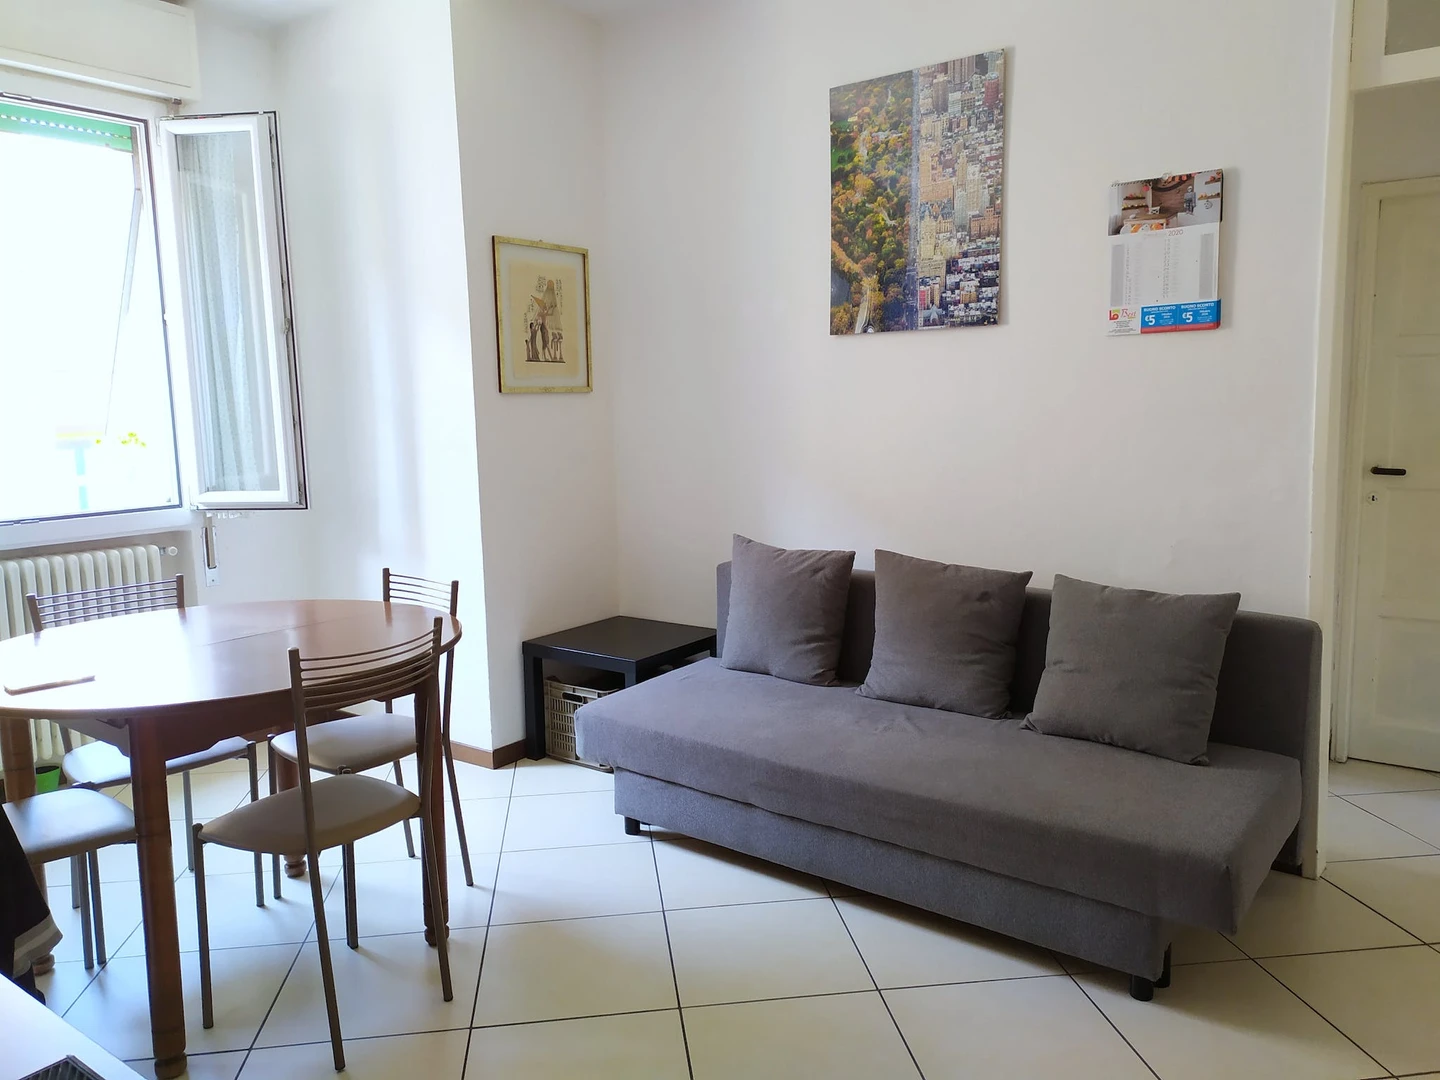 Renting rooms by the month in forli